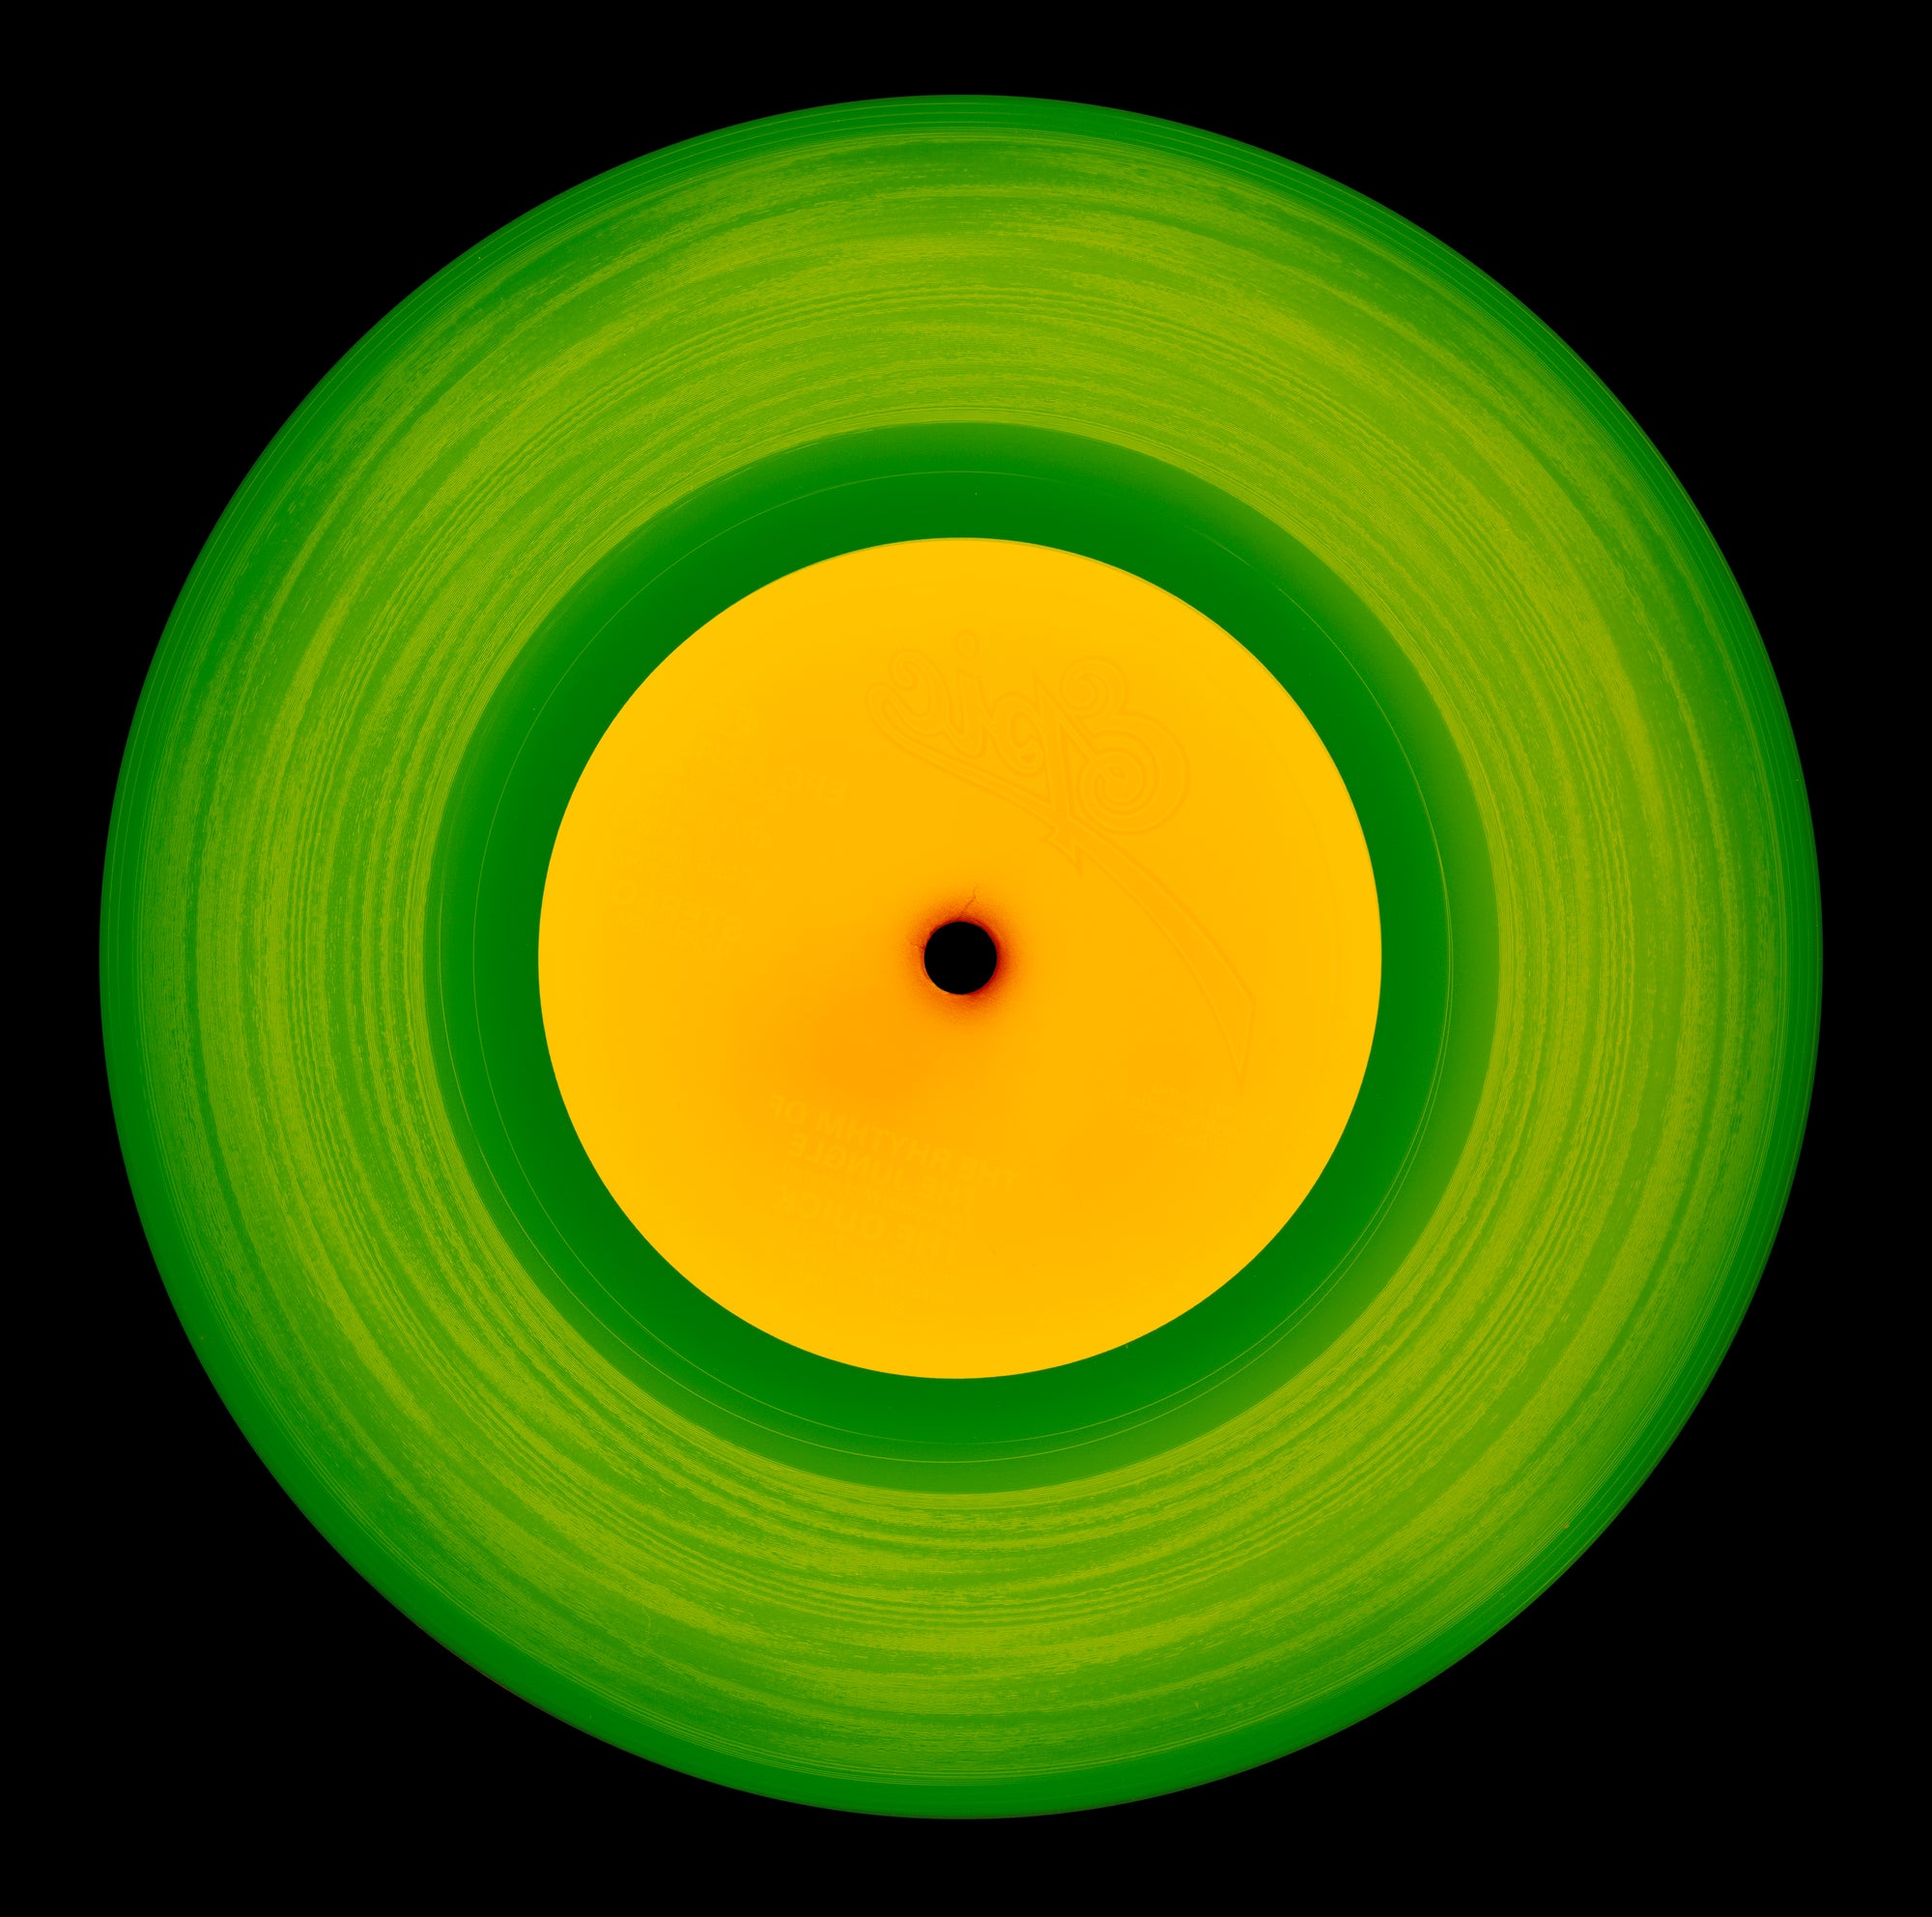 Photograph by Natasha Heidler and Richard Heeps.  A green vinyl record with circular grooves is central with an orange centre sitting on a black background.